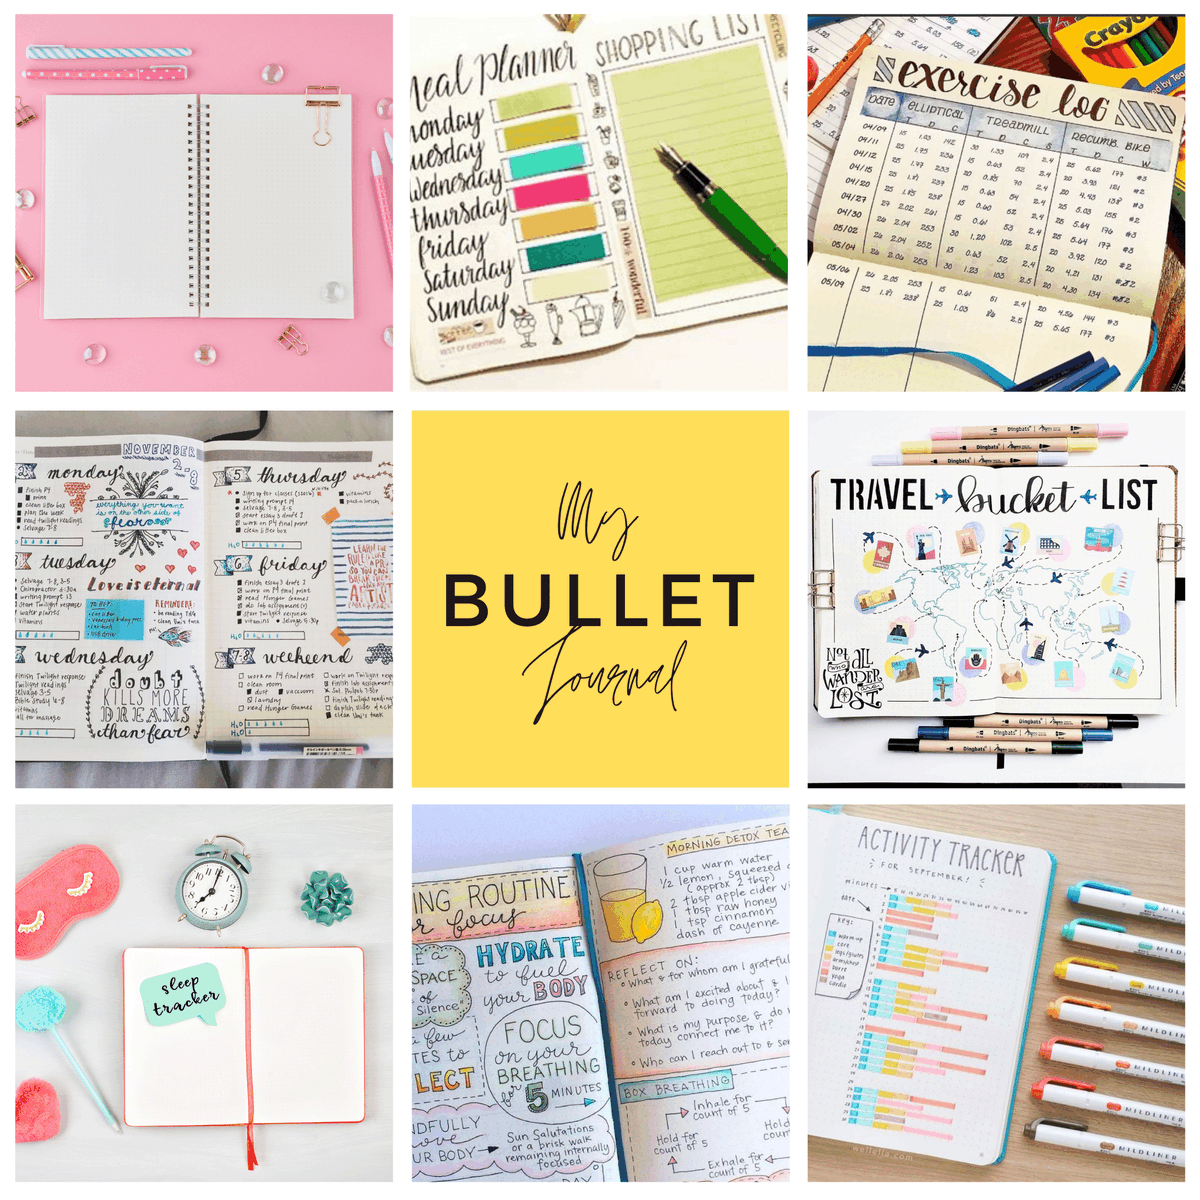 What Is a Bullet Journal? Read this to find out everything you need to know to make the most of BuJo as a Creativity Tool, Planner and Time Management SystemThread Time 